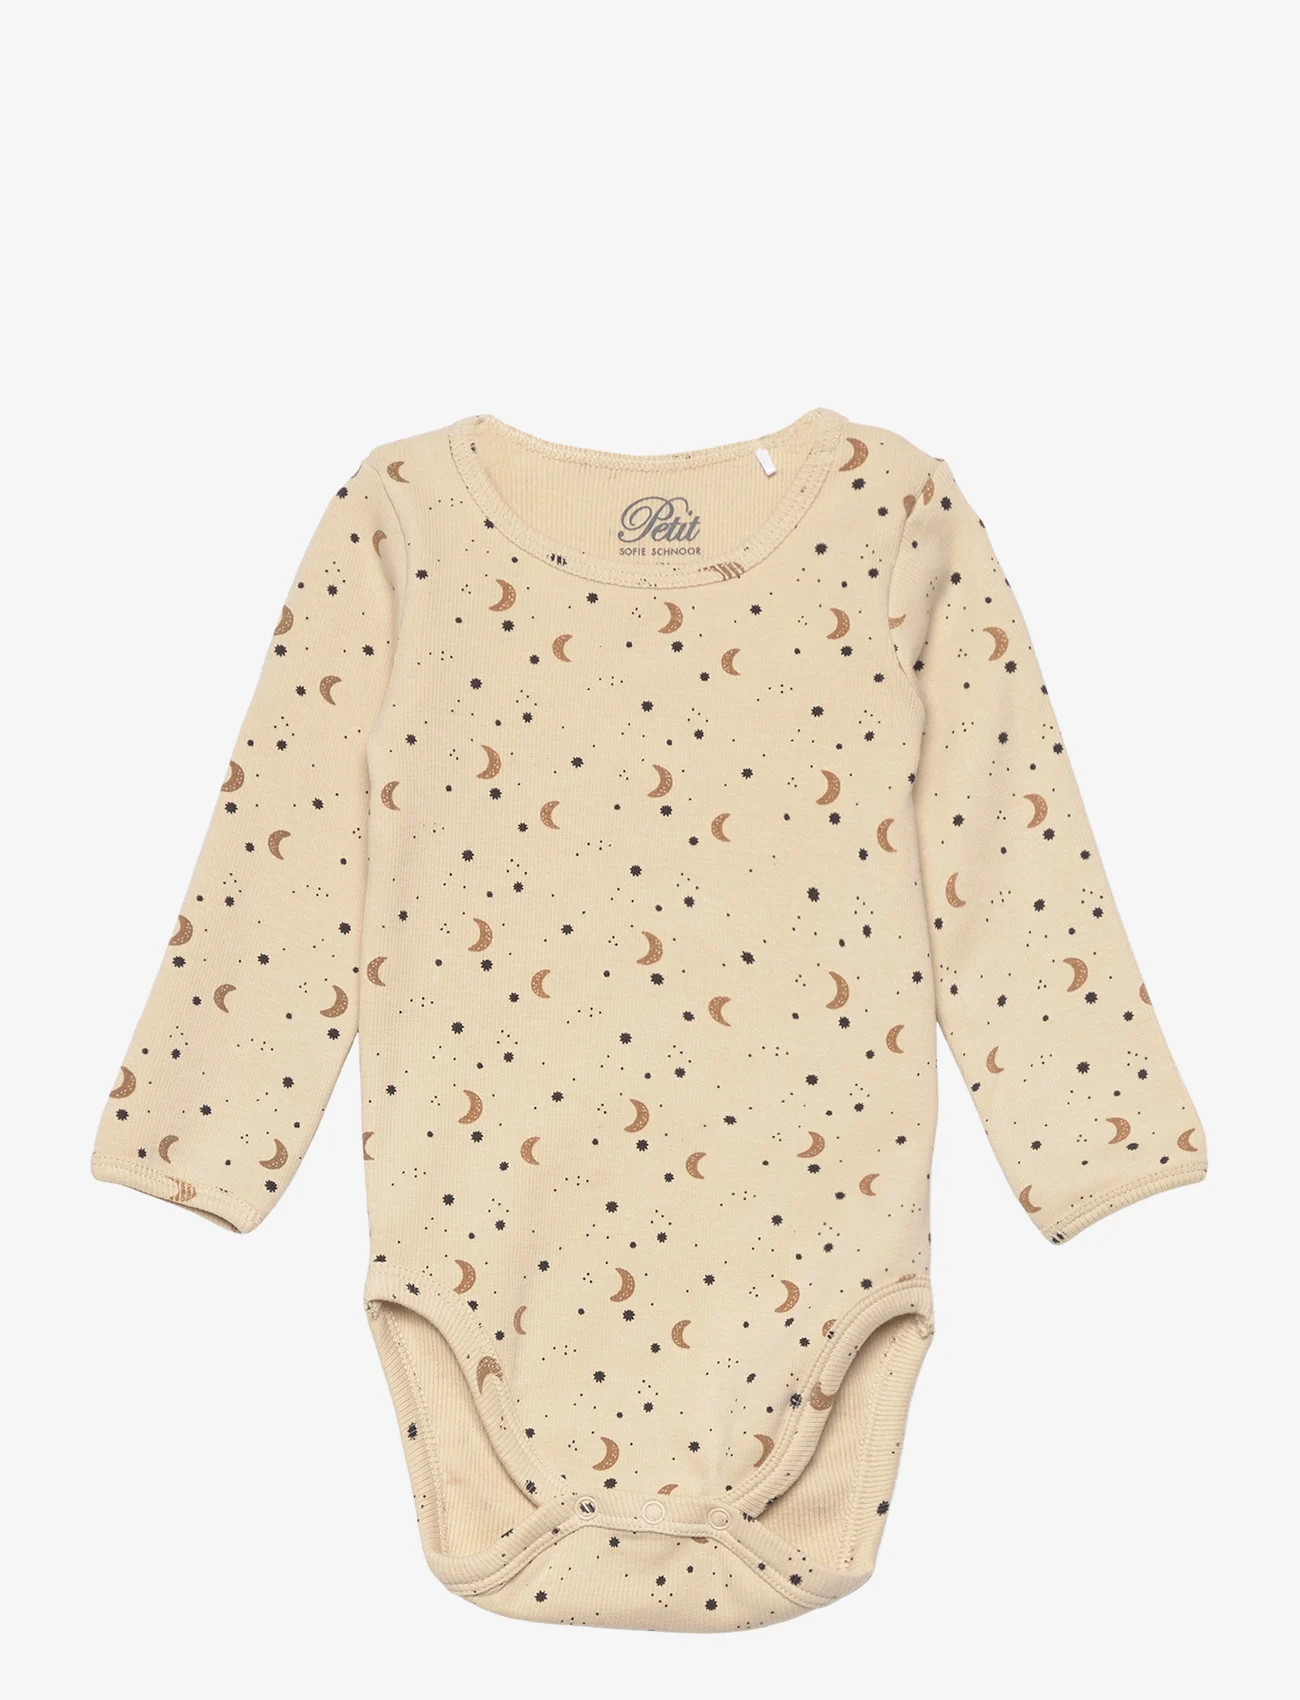 Sofie Schnoor Baby and Kids - Body - lowest prices - sand - 0